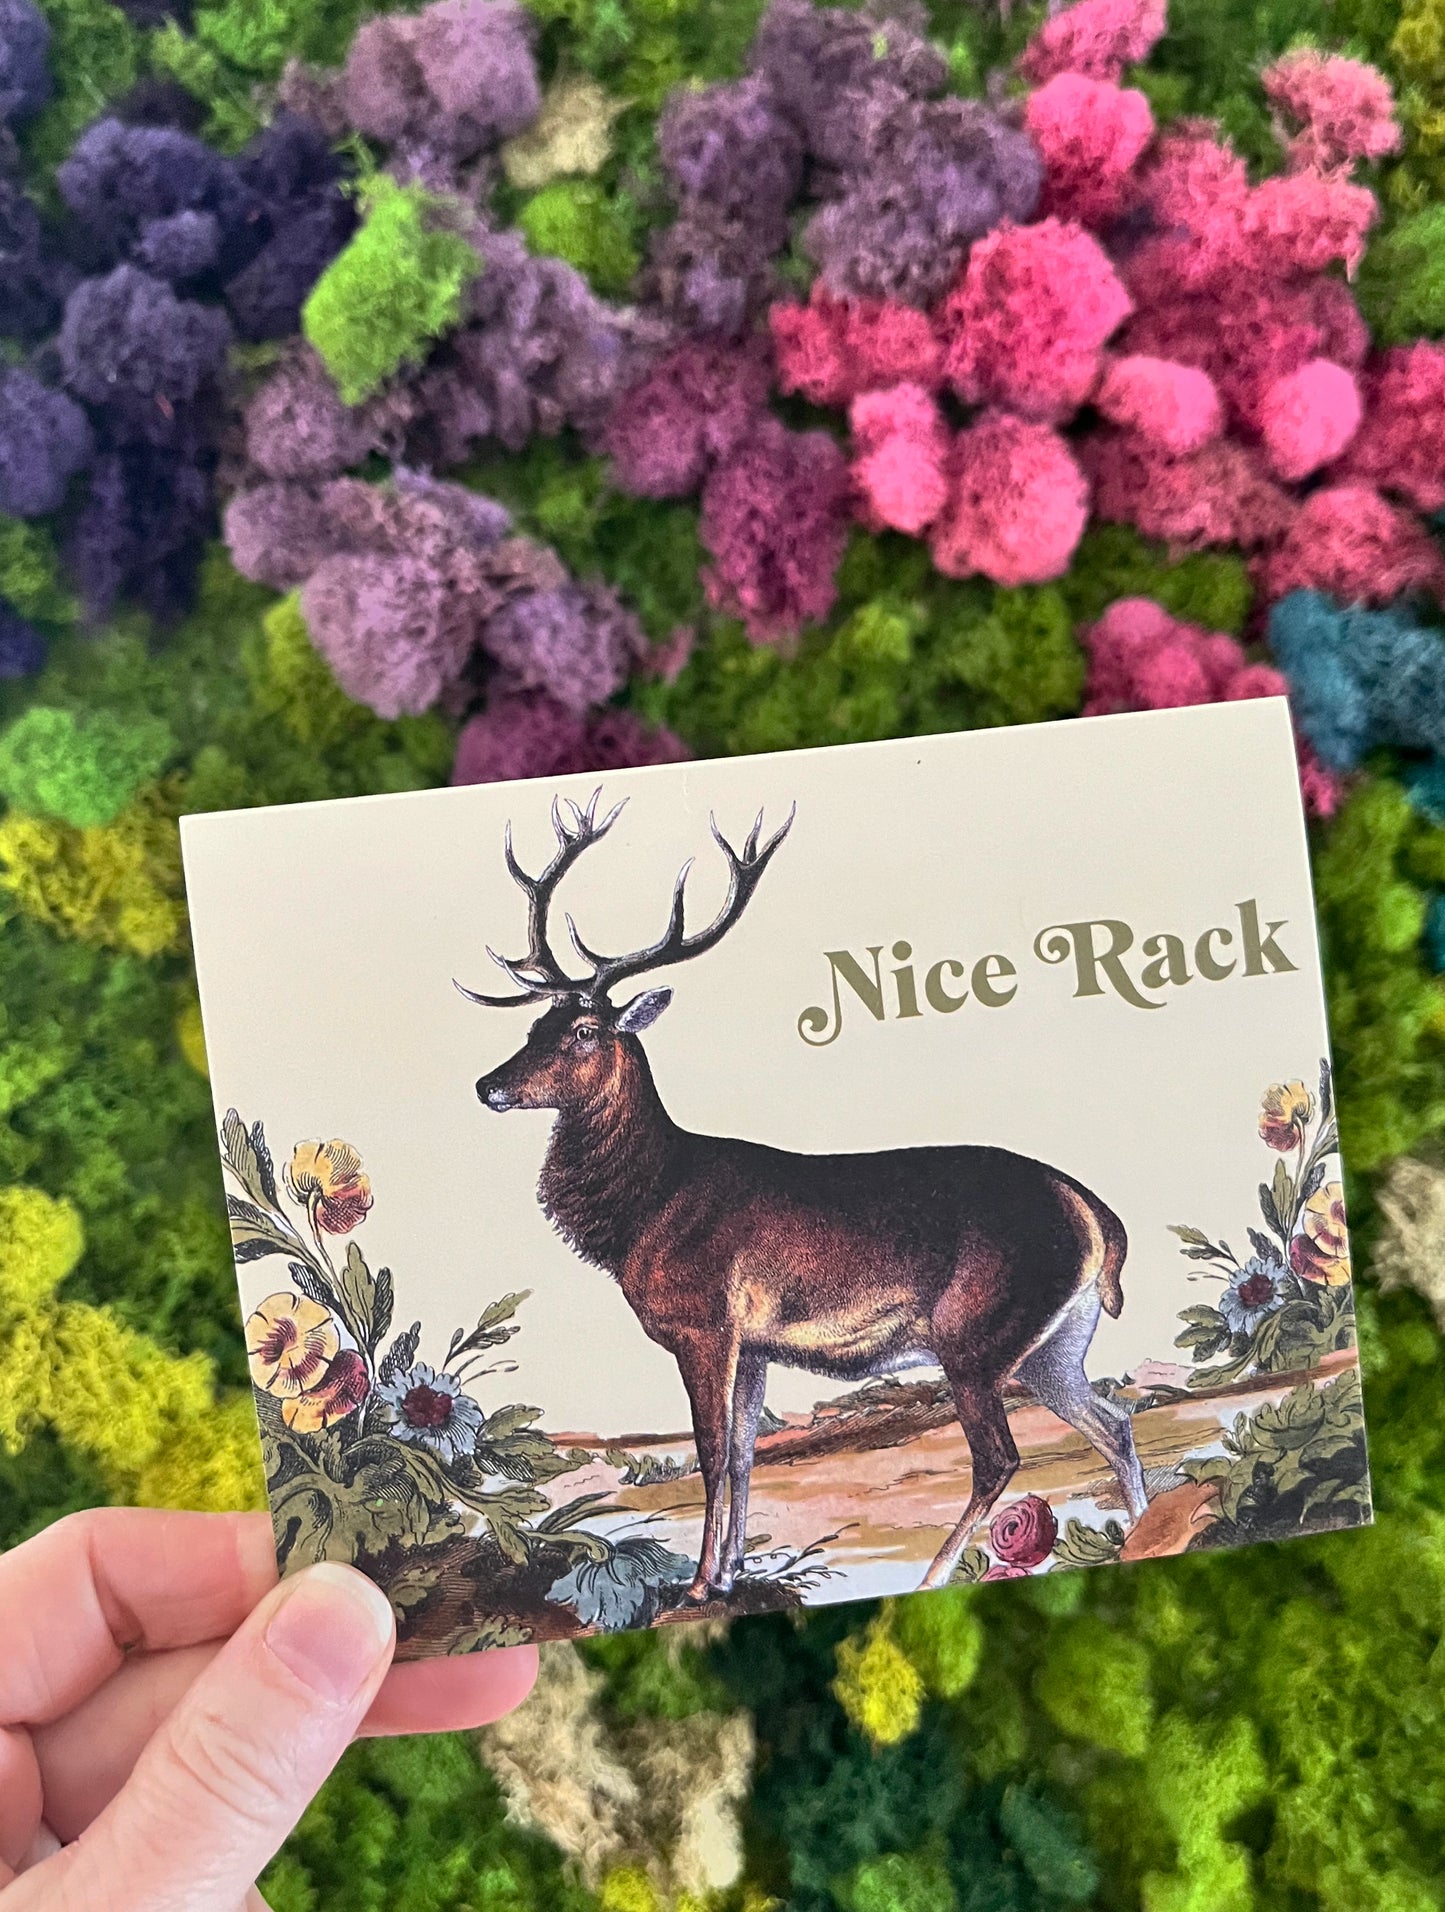 pretty greeting card boyfriend girlfriend valentine's day funny nice rack text on front blank inside hunter outdoor lover deer flowers